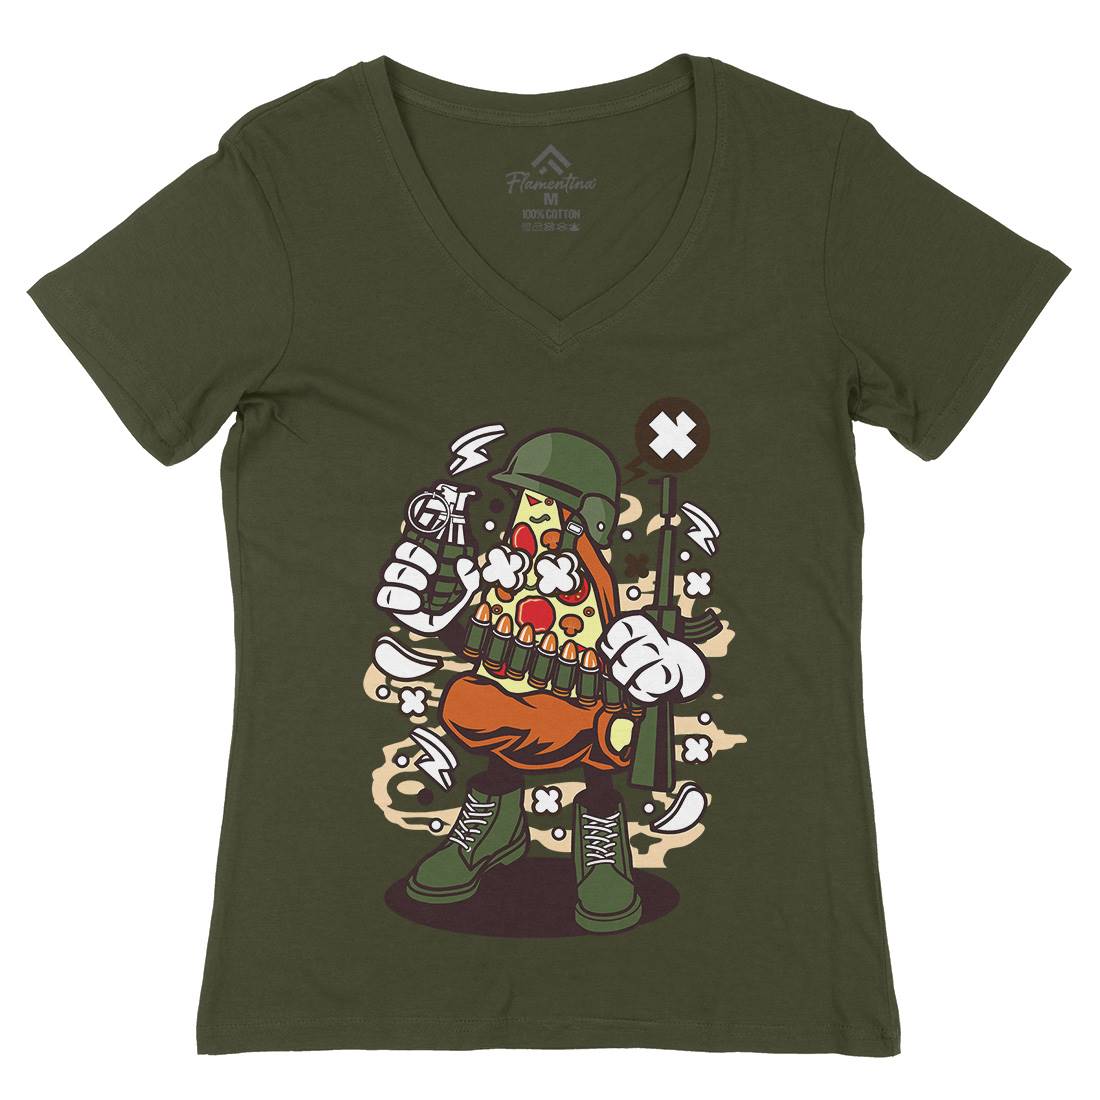 Soldier Pizza Womens Organic V-Neck T-Shirt Army C254